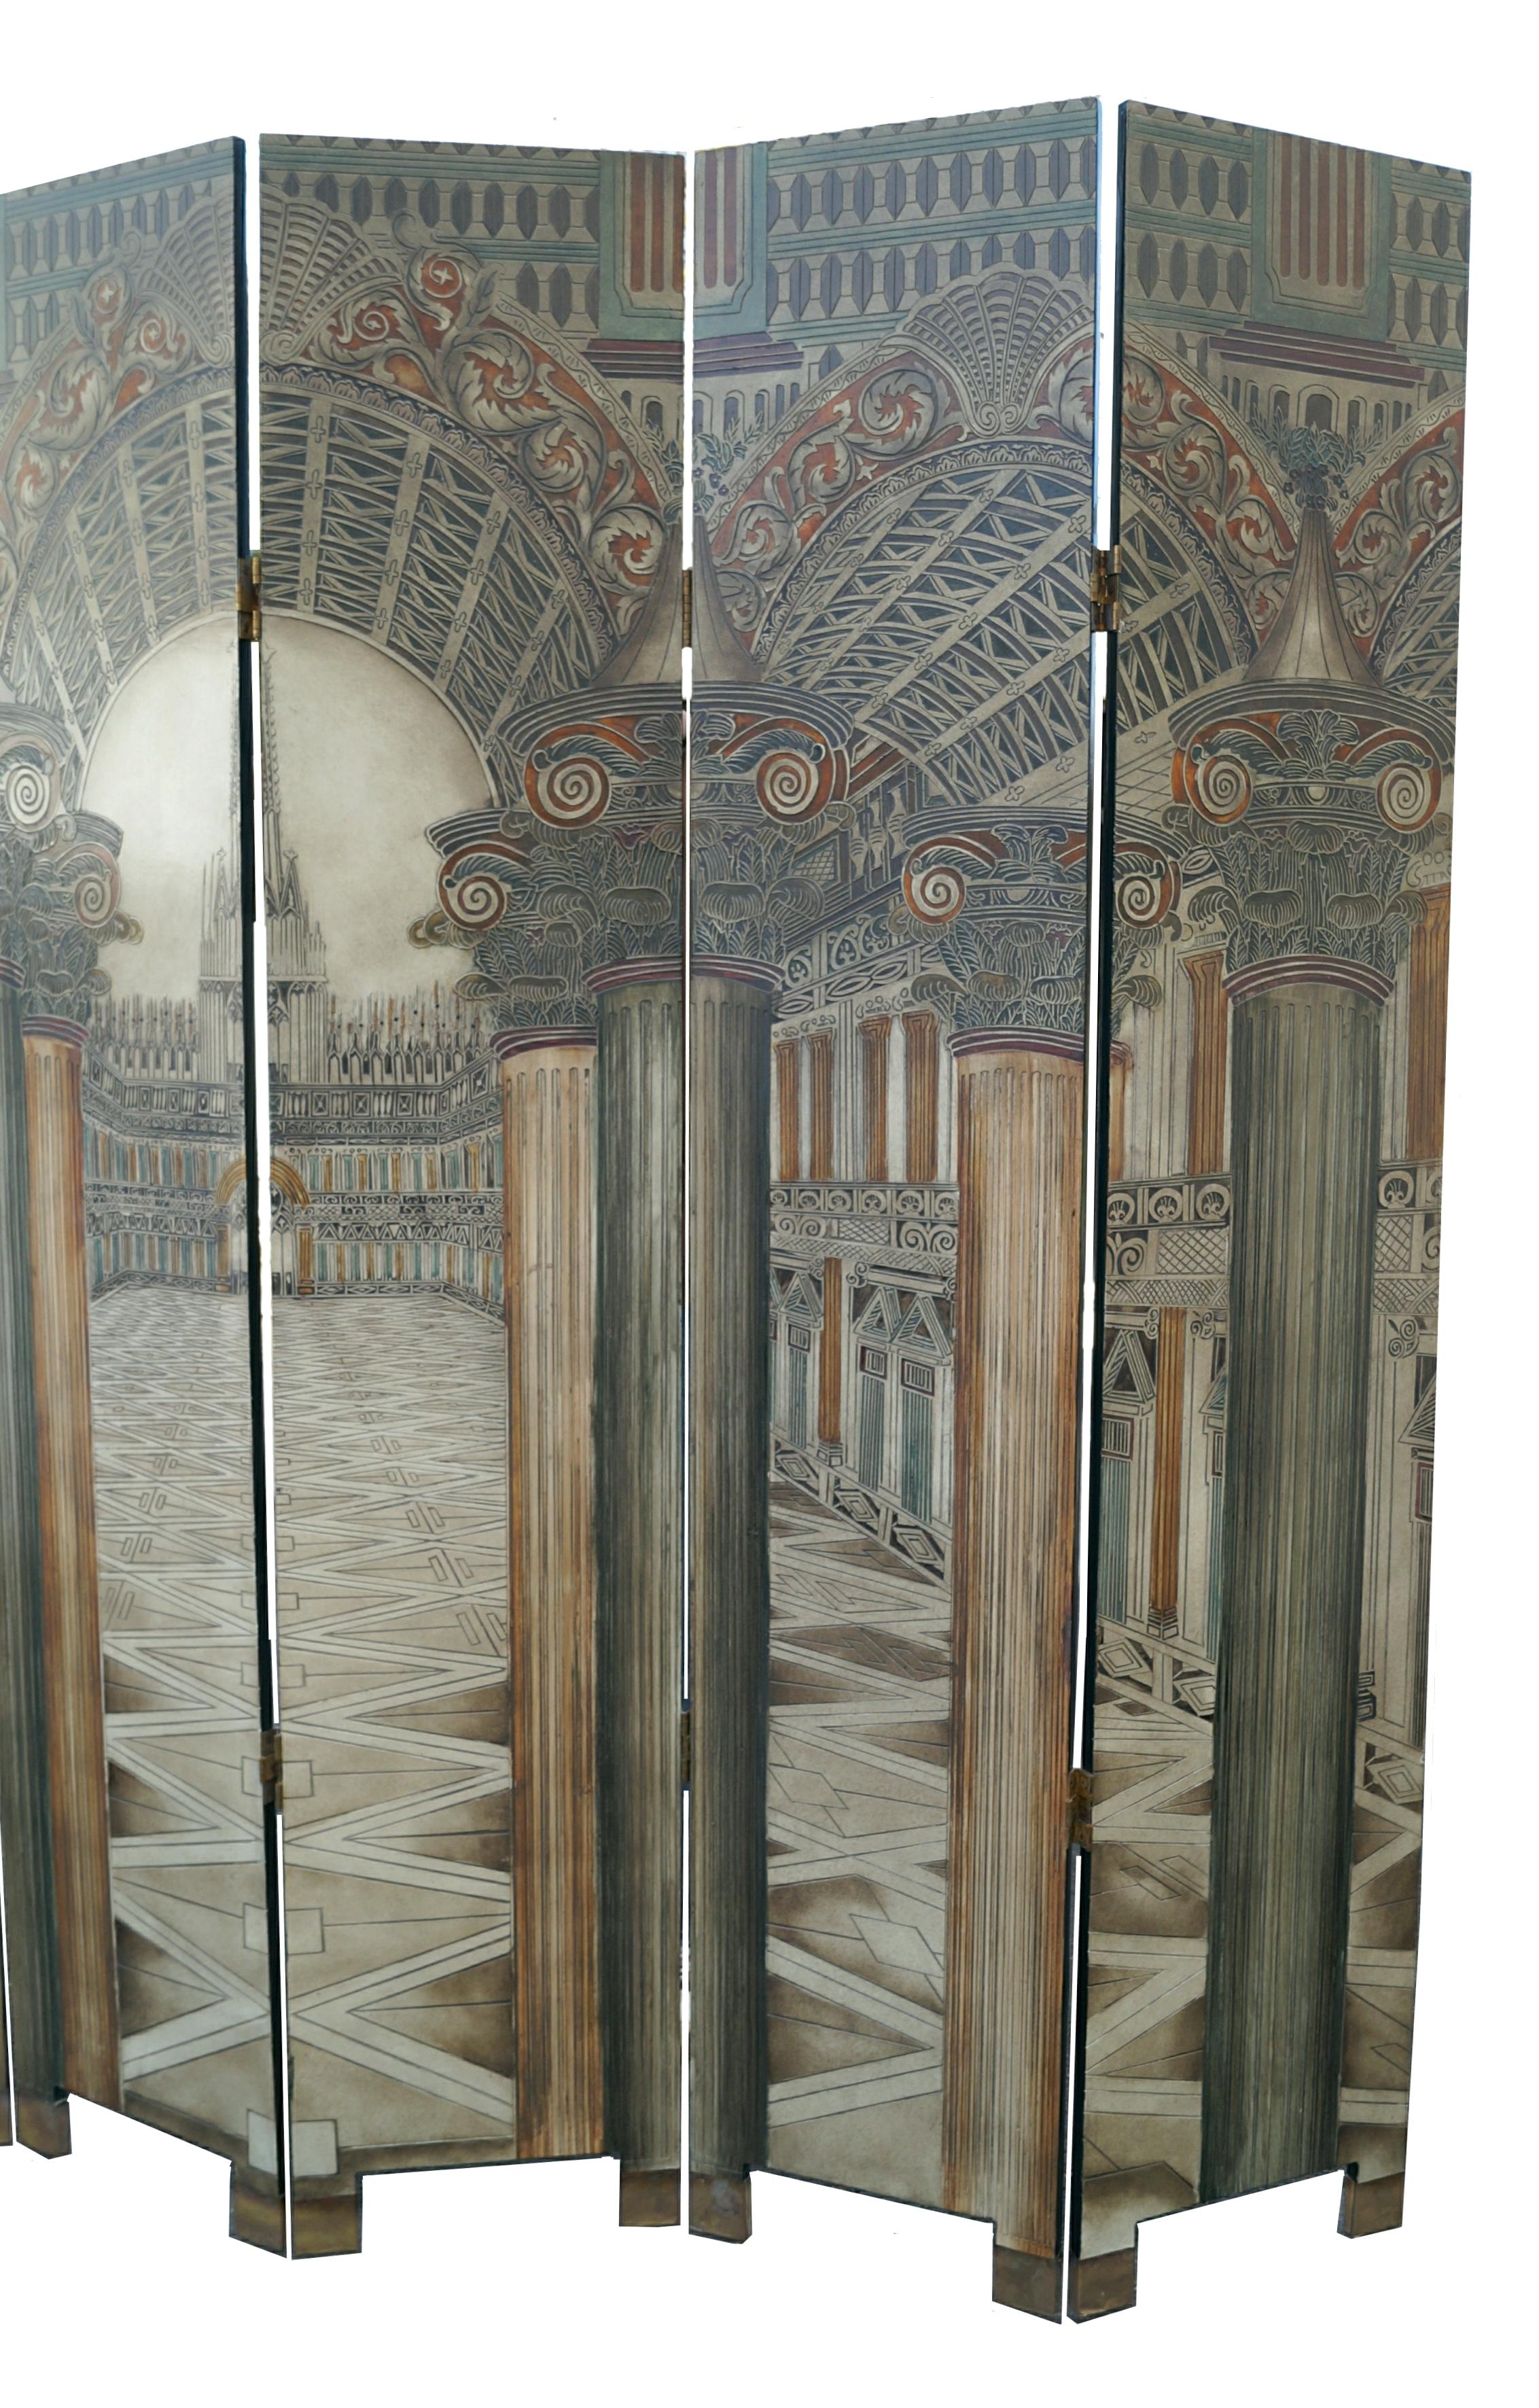 Late 20th Century Piero Fornasetti Style 6 Panel Architectural Privacy Screen Room Divider For Sale